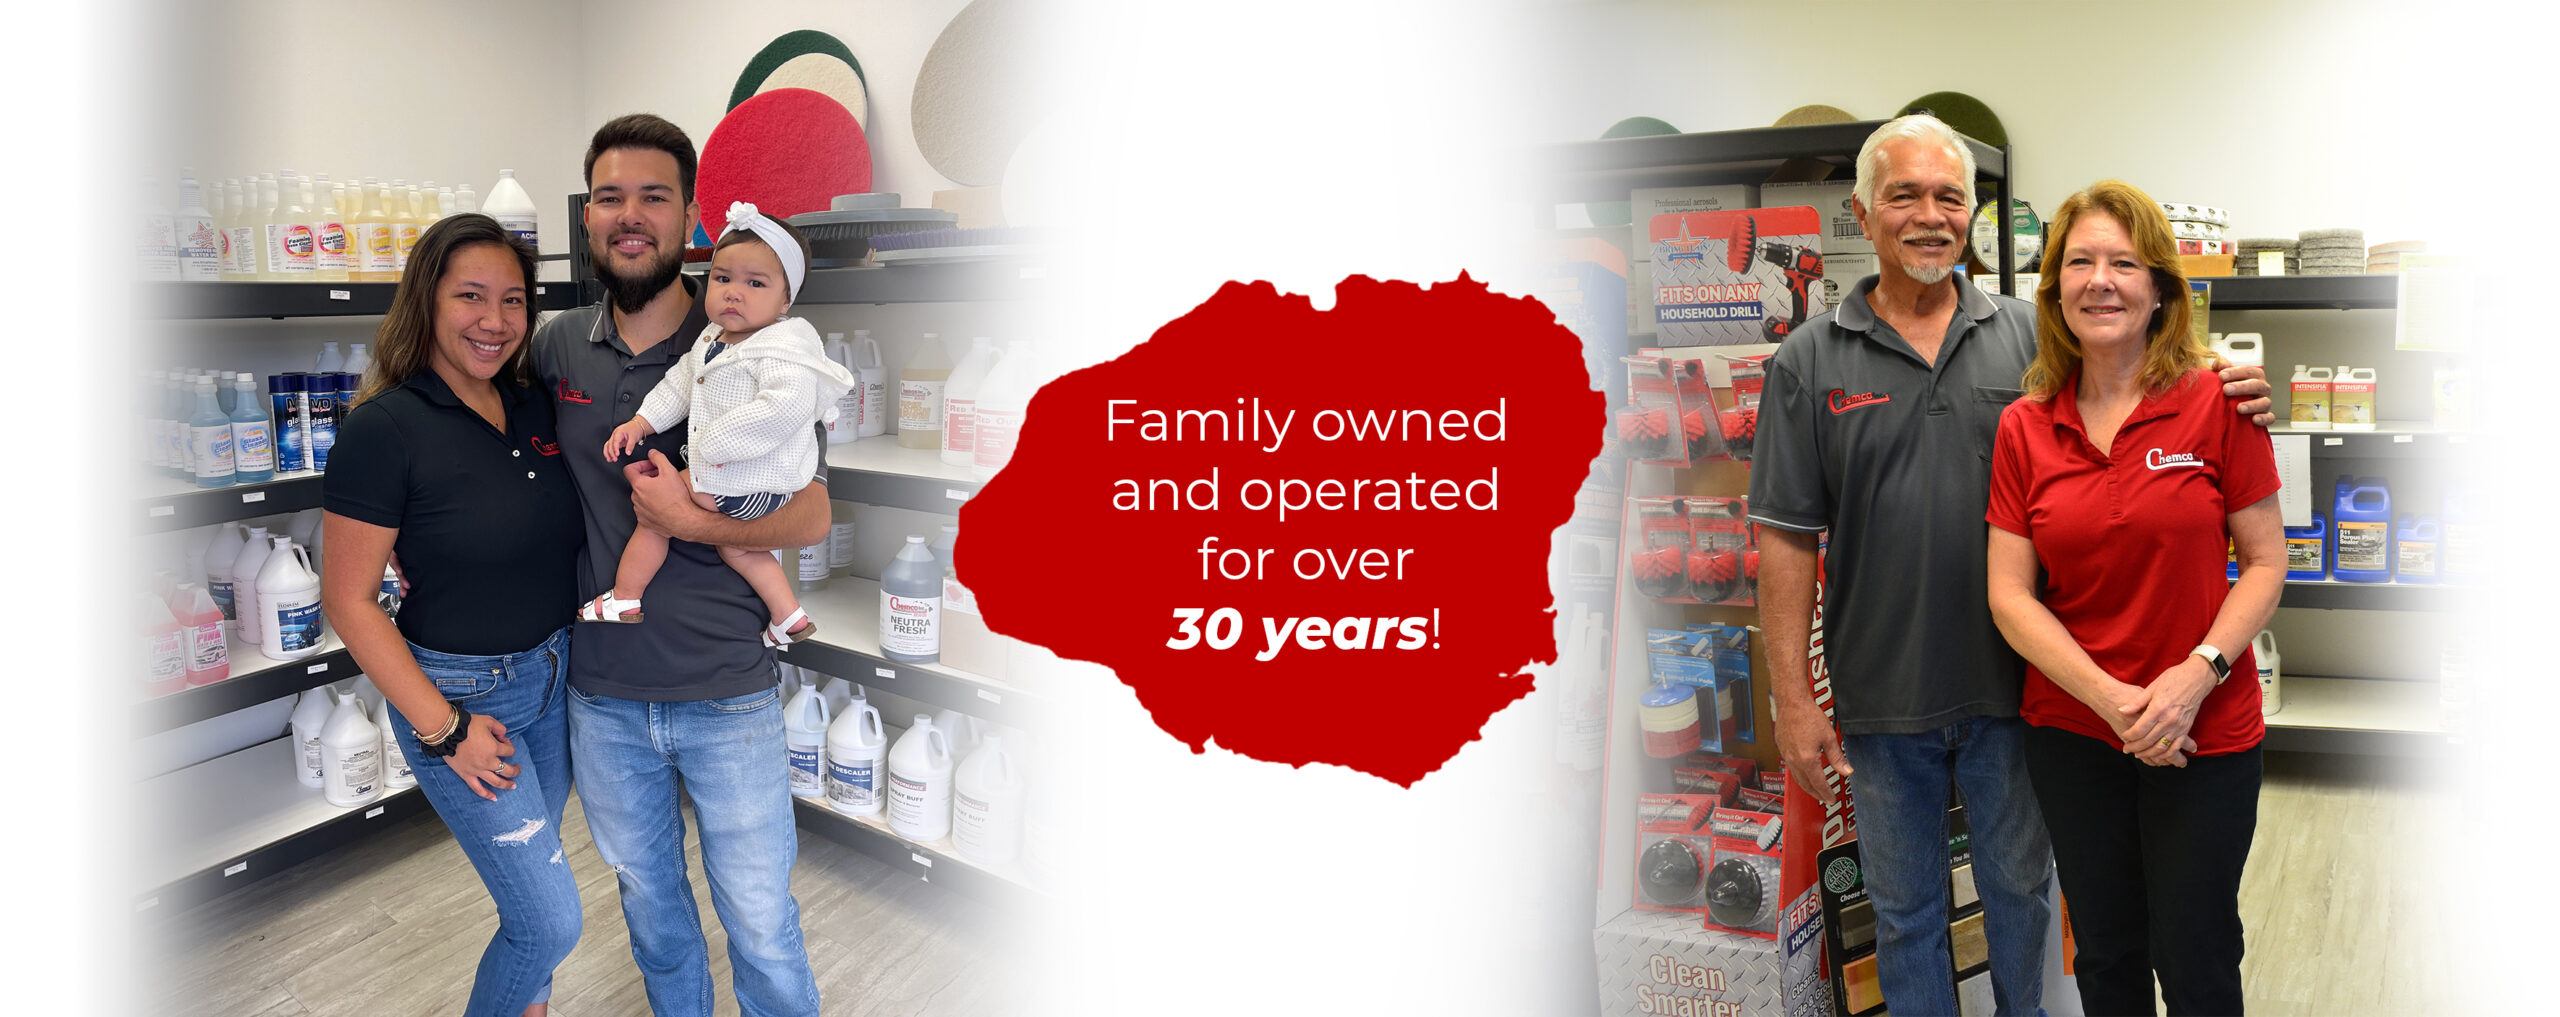 family-owned-operated